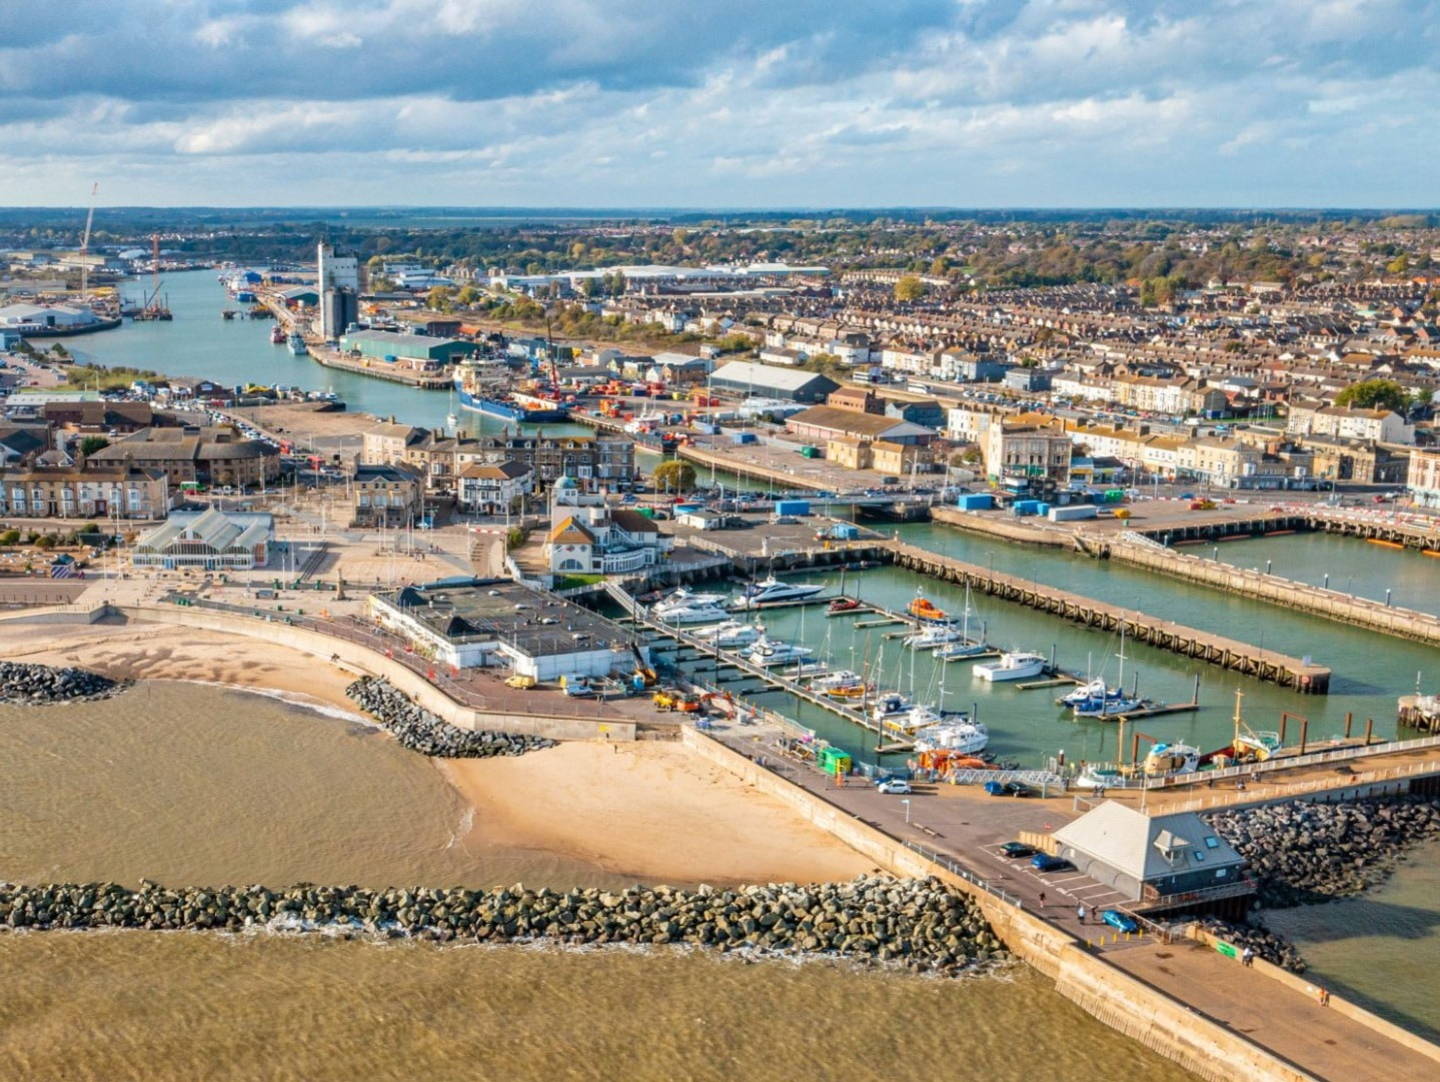 Lowestoft from above